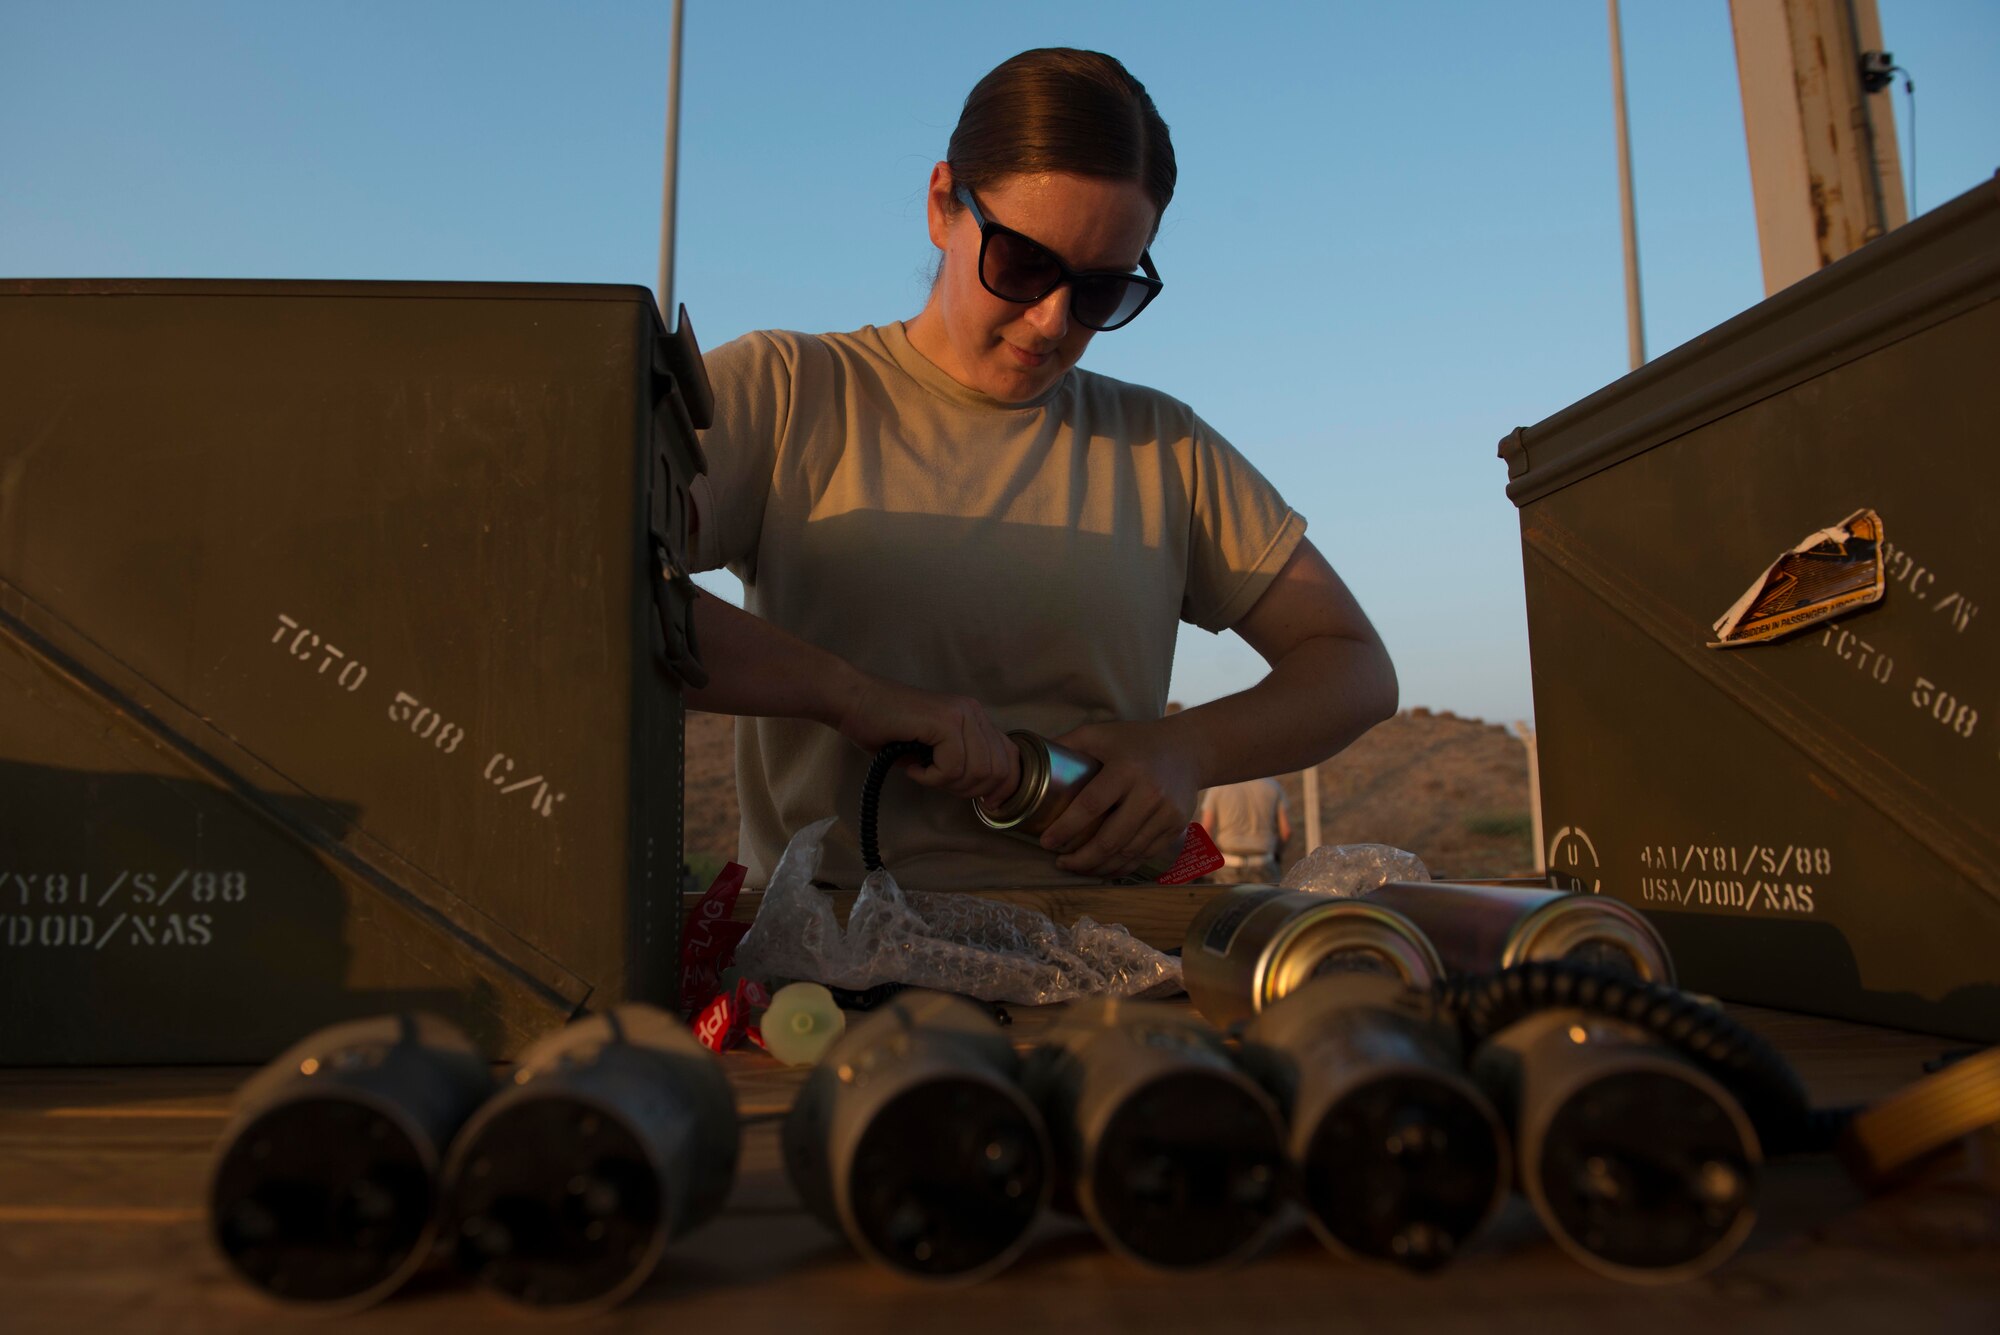 U.S. Air Force Master Sgt. Patricia Winn, 447th Expeditionary Aircraft Maintenance Squadron munitions systems specialist, inspects fuses prior to installation on a GBU-12 Paveway II laser-guided bomb Aug. 8, 2016, at Incirlik Air Base, Turkey. Munitions systems specialists perform inventories and correct discrepancies found with munitions. (U.S. Air Force photo by Senior Airman John Nieves Camacho)